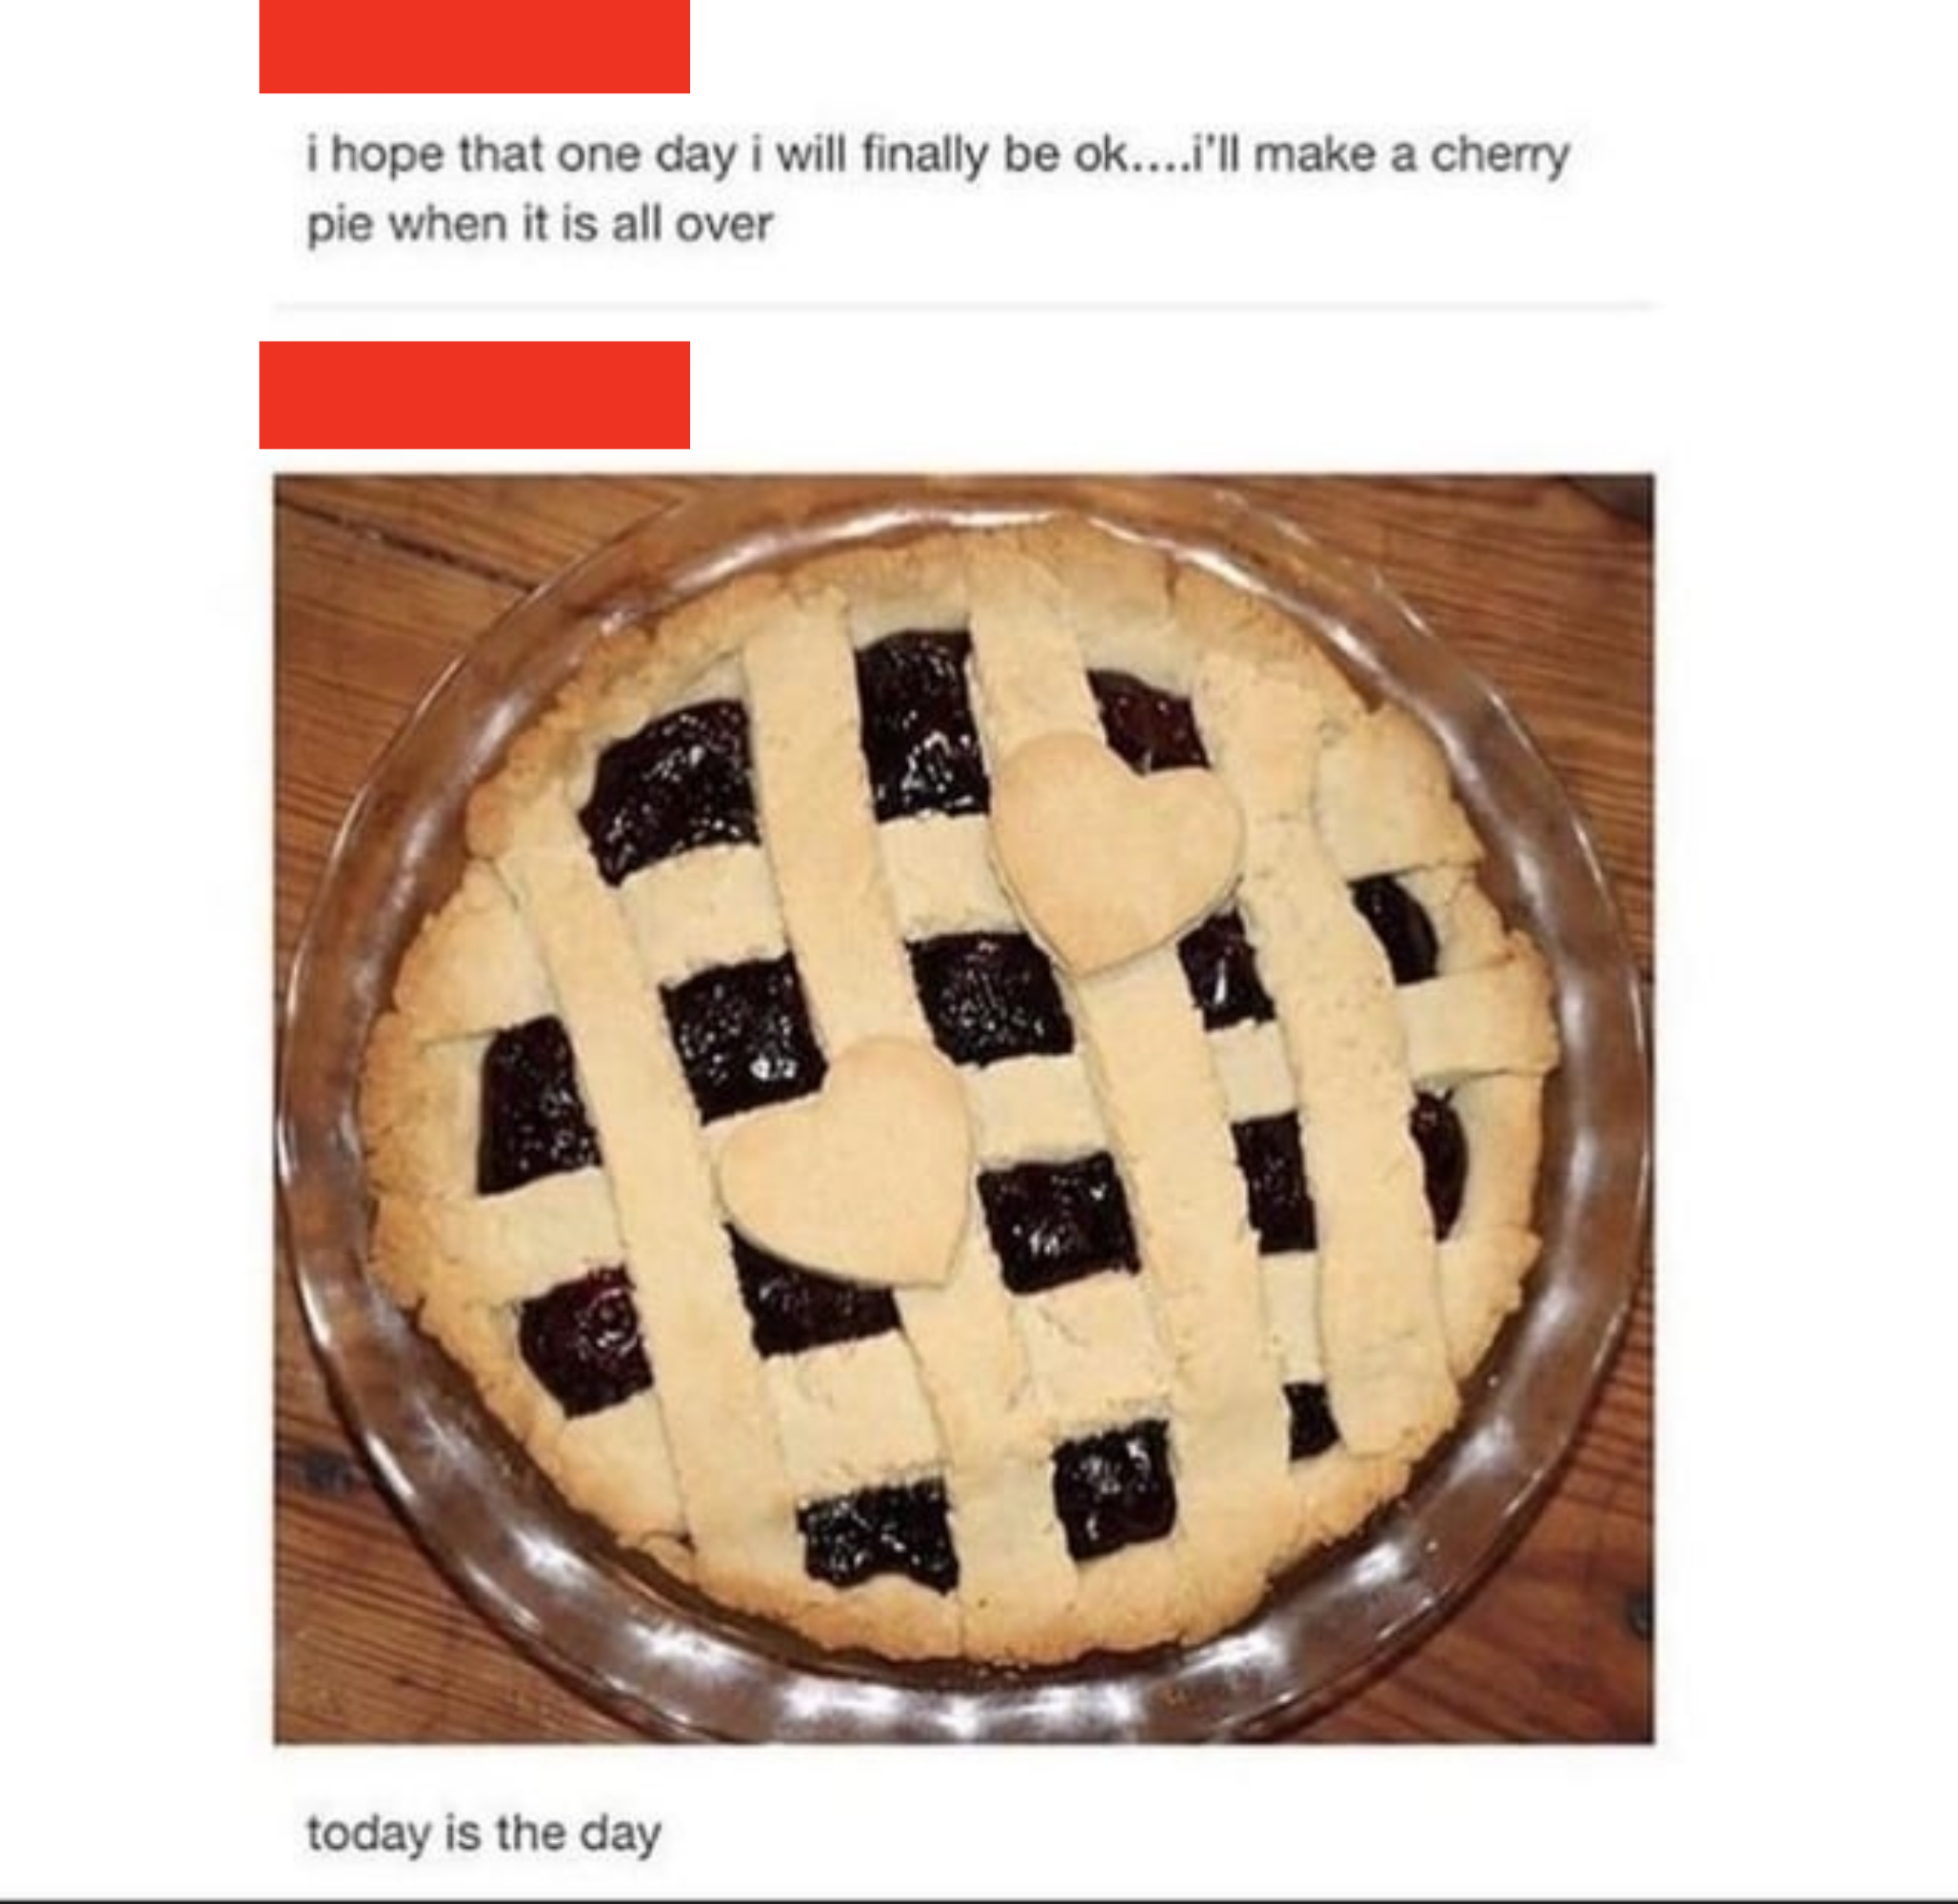 fruit pie with text i. hop ehtat one day i will finally be ok i&#x27;ll make a cherry pie when it&#x27;s all over, and then today is the day